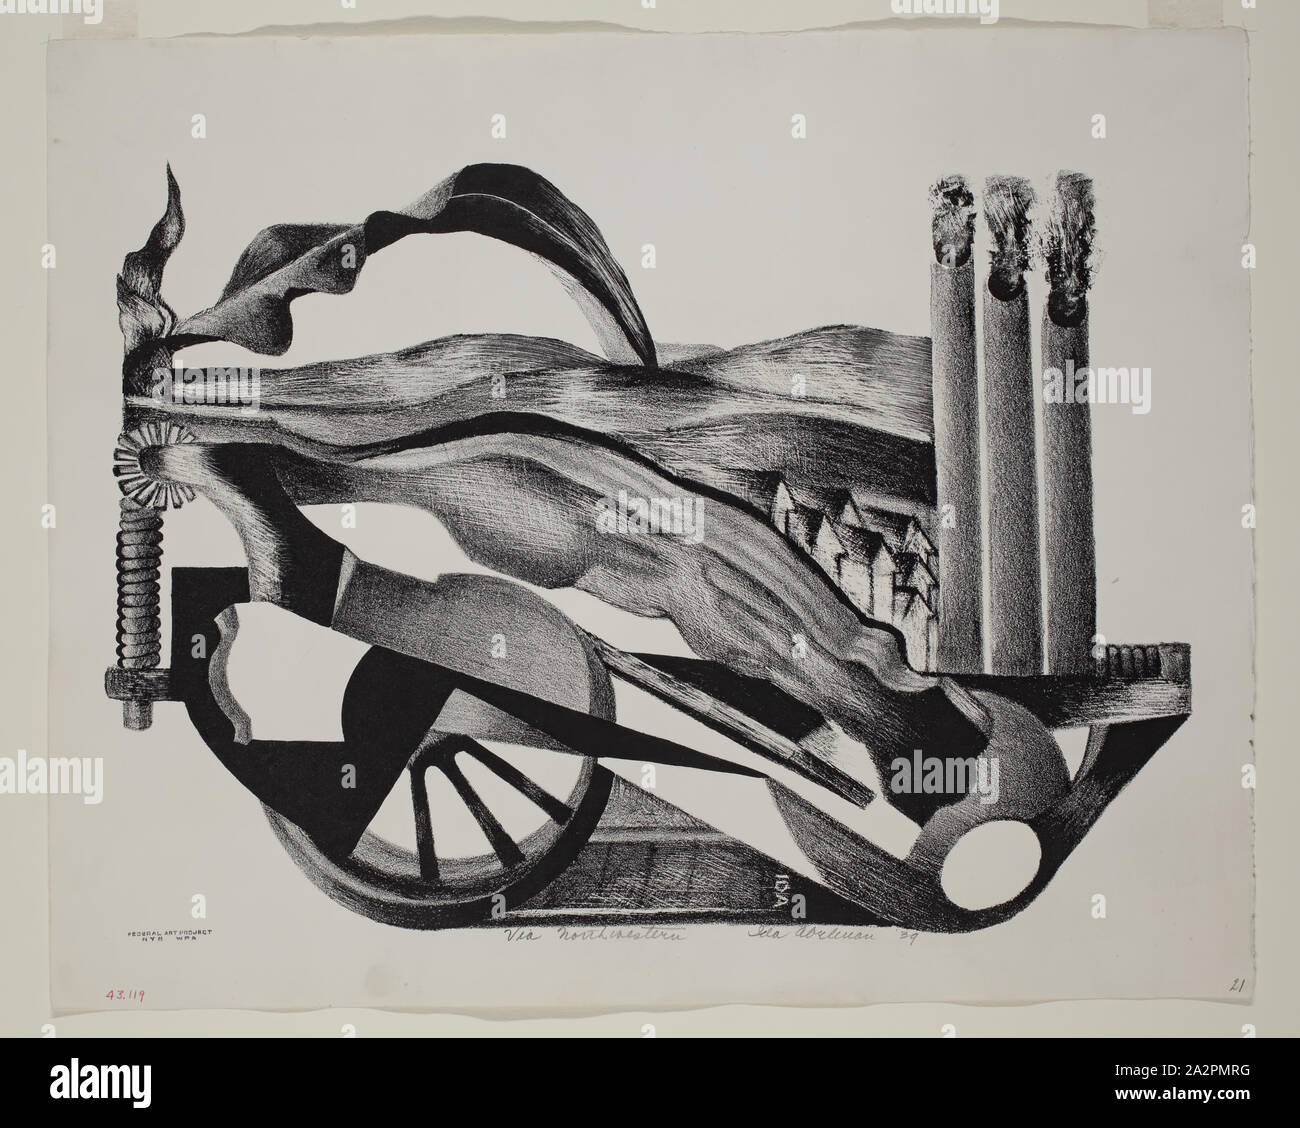 ida abelman american 1910 2002 via northwestern 1939 lithograph printed in black ink on wove paper image 10 78 14 38 inches 276 365 cm 2A2PMRG